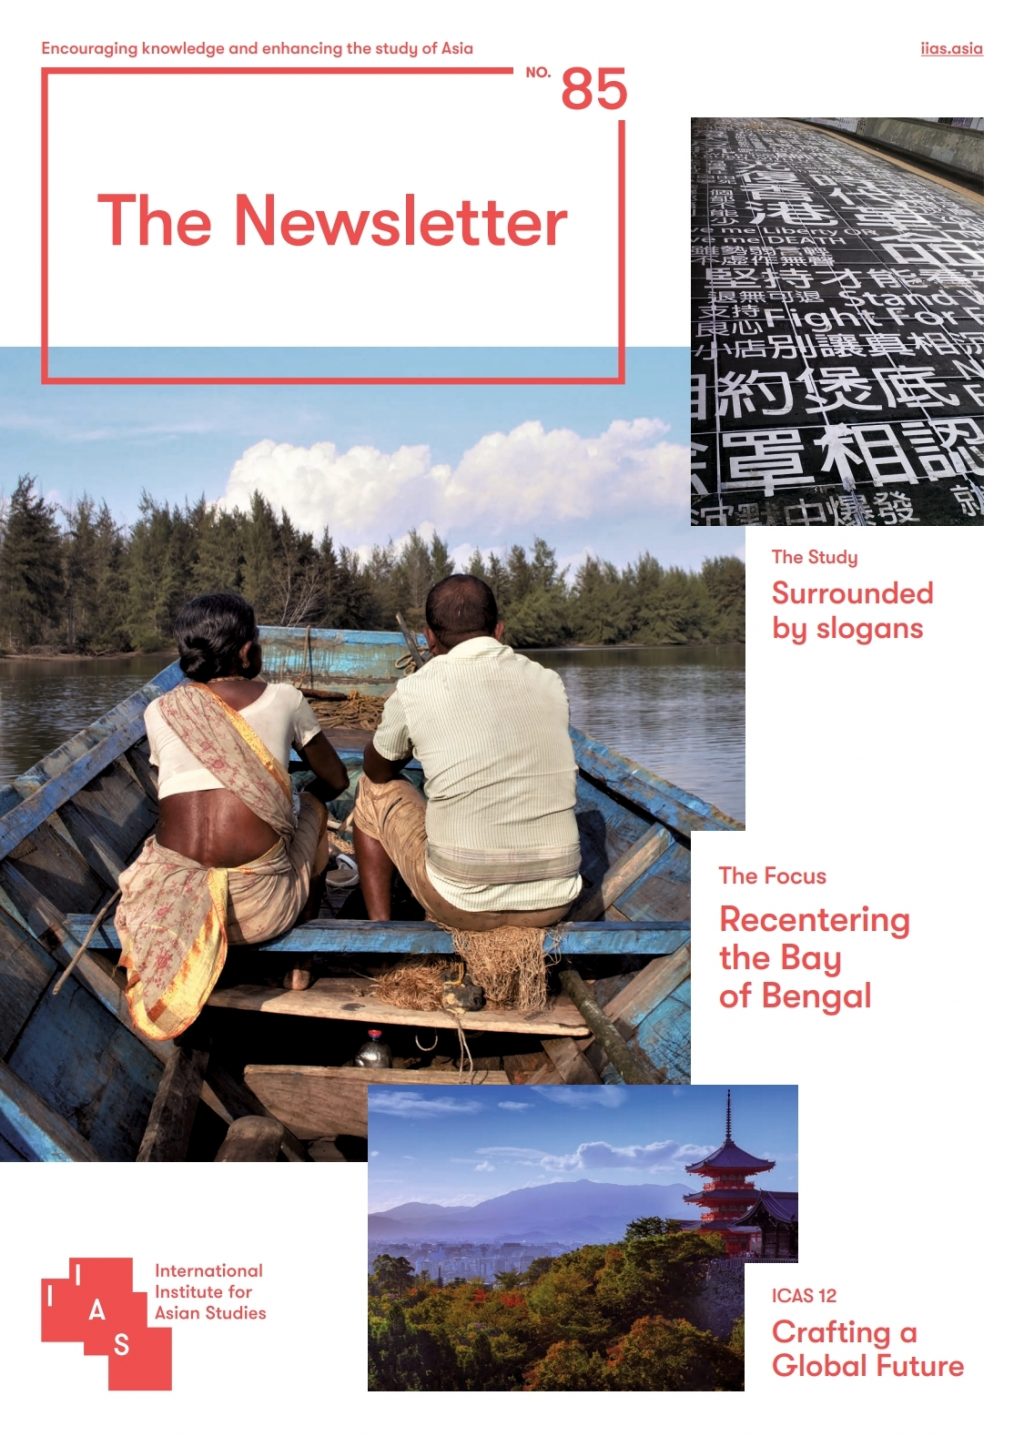 IIAS The Newsletter Vol. 85- News from Northeast Asia